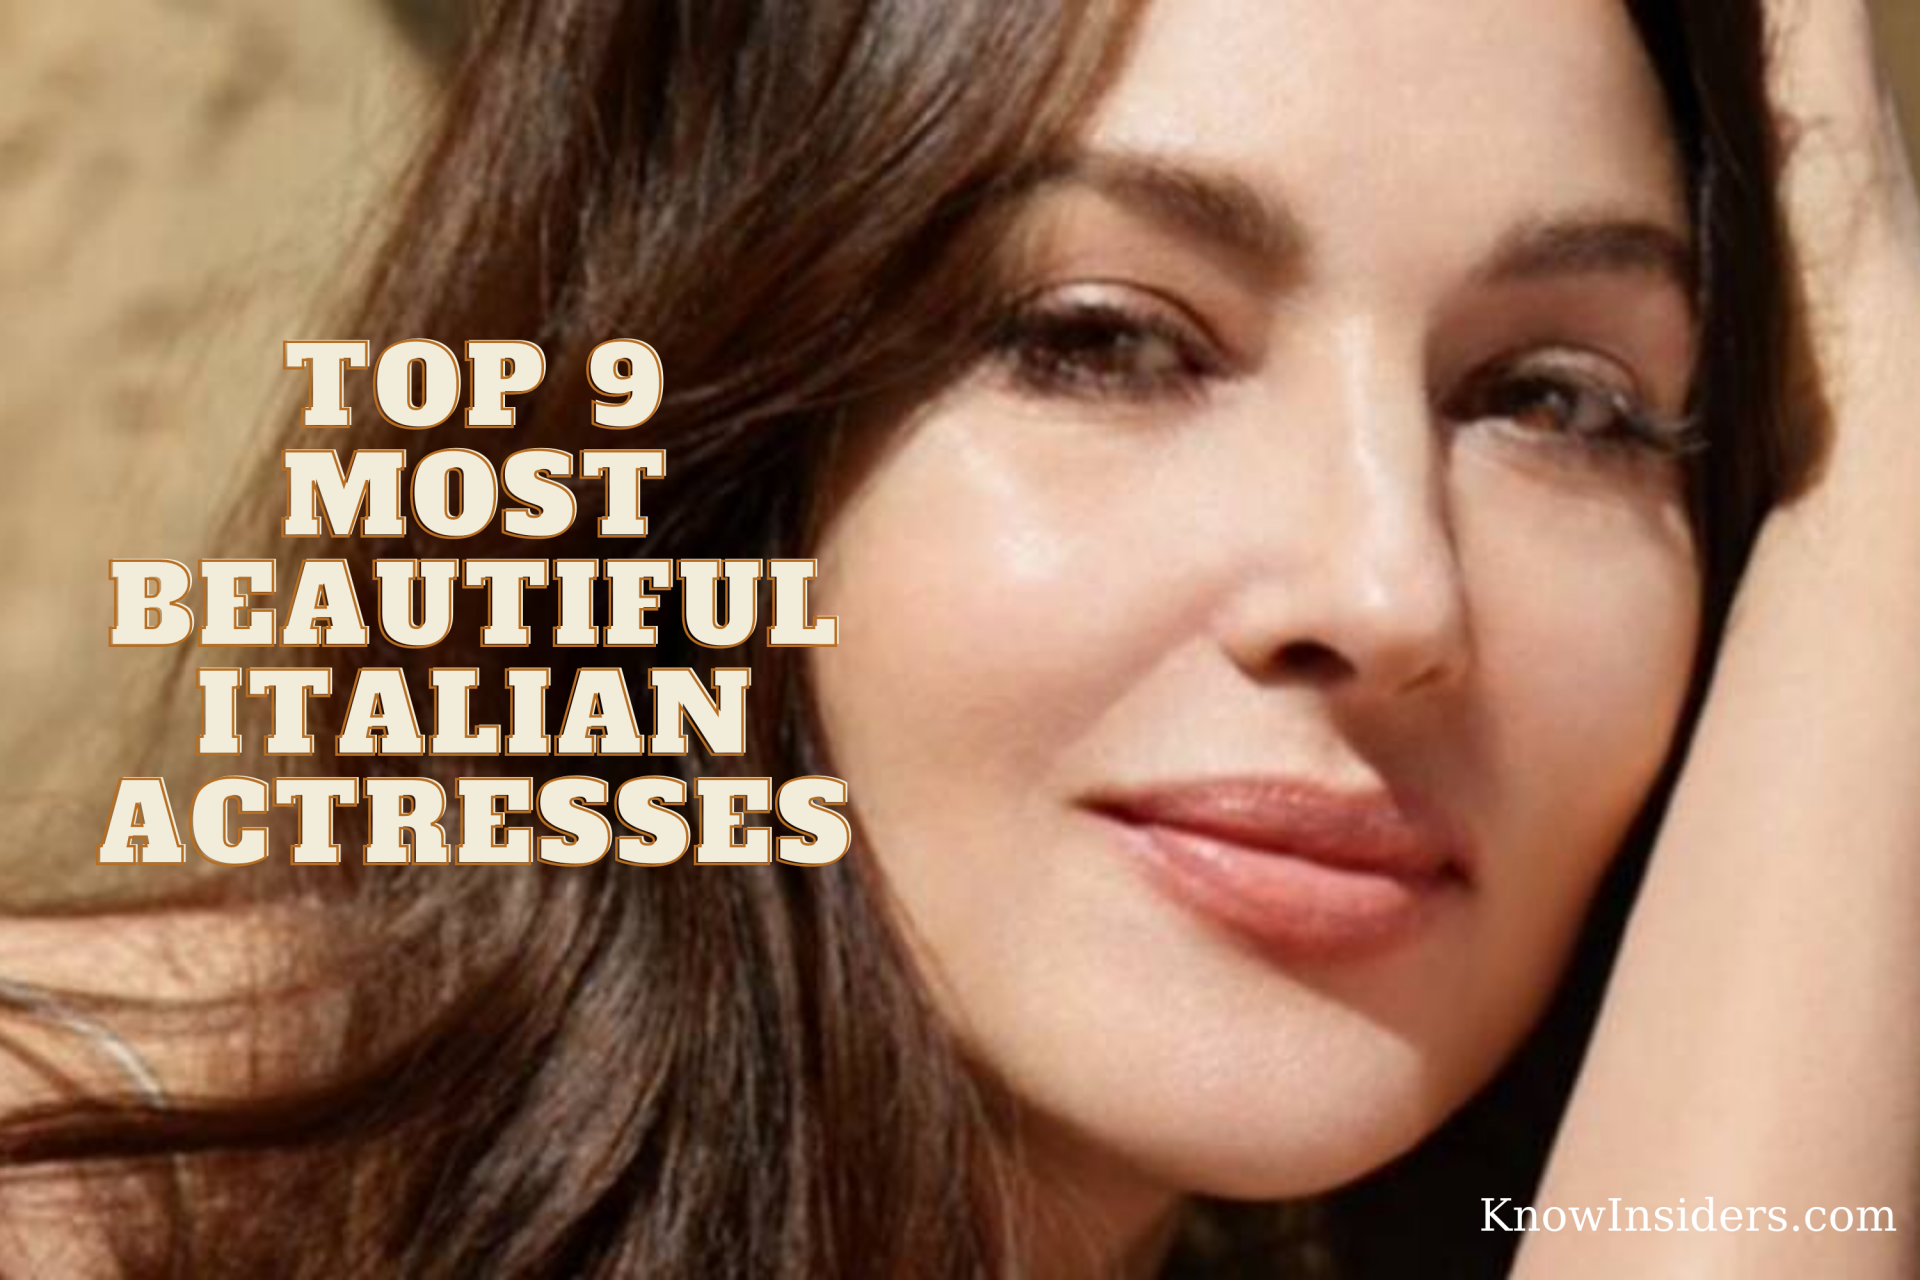 Top 9 Most Beautiful Italian Actresses - Updated